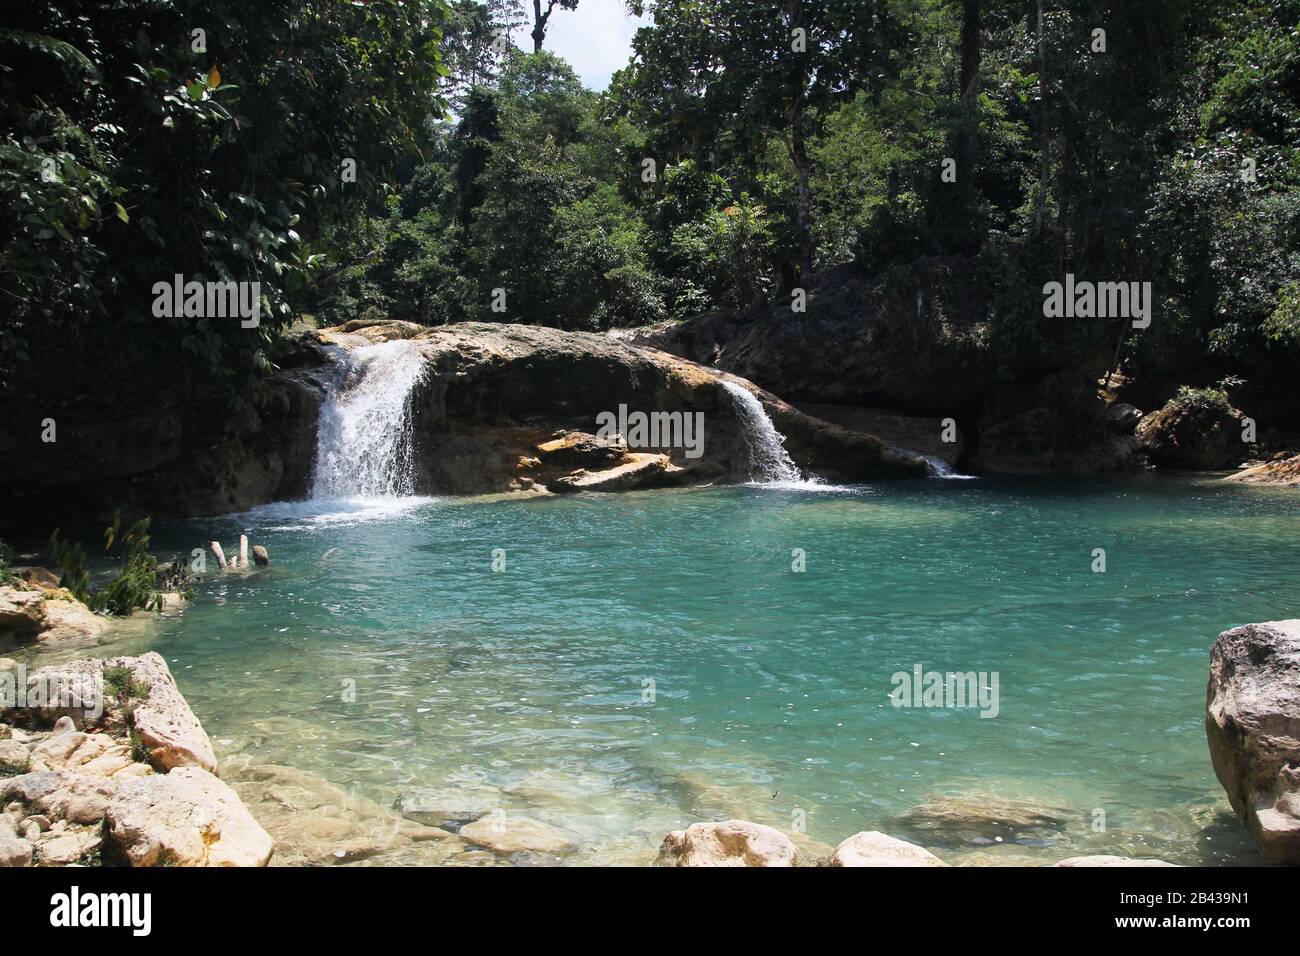 Wide shot of Baobao Falls, one of the attractions in Liangga, Surigao del Sur, Philippines. Stock Photo